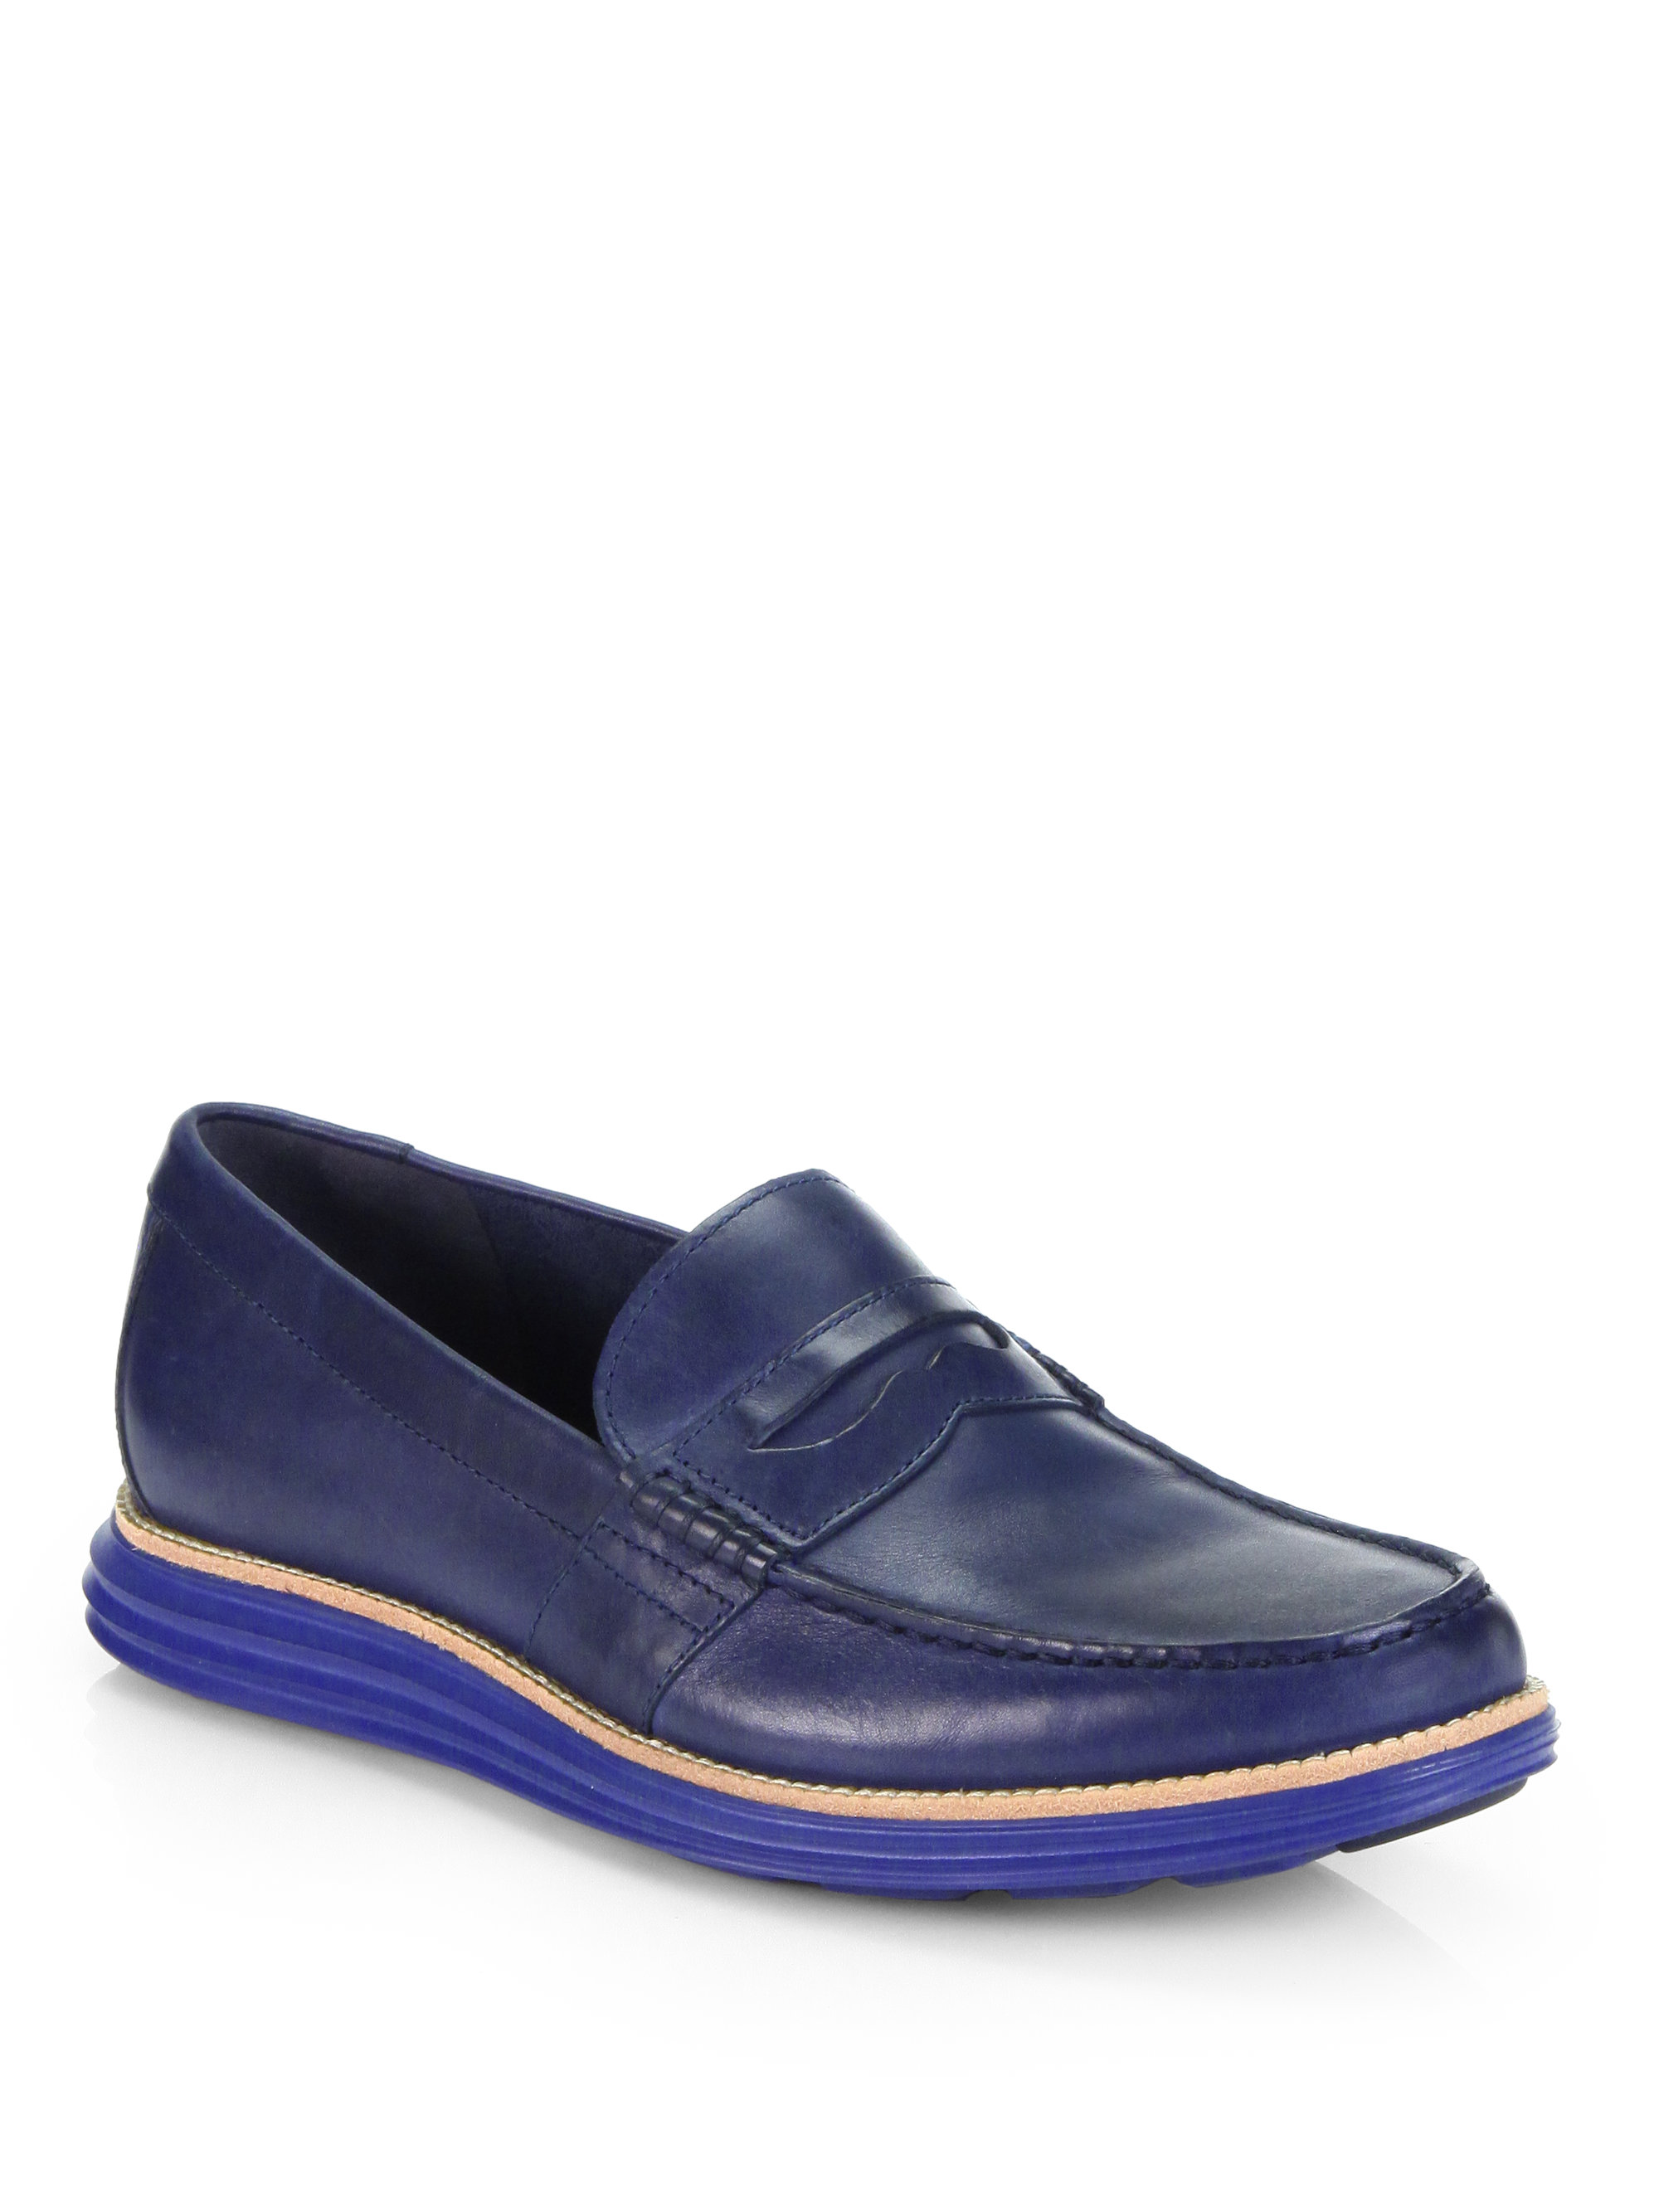 Cole Haan Lunar Grand Penny Loafers in Blue for Men - Lyst